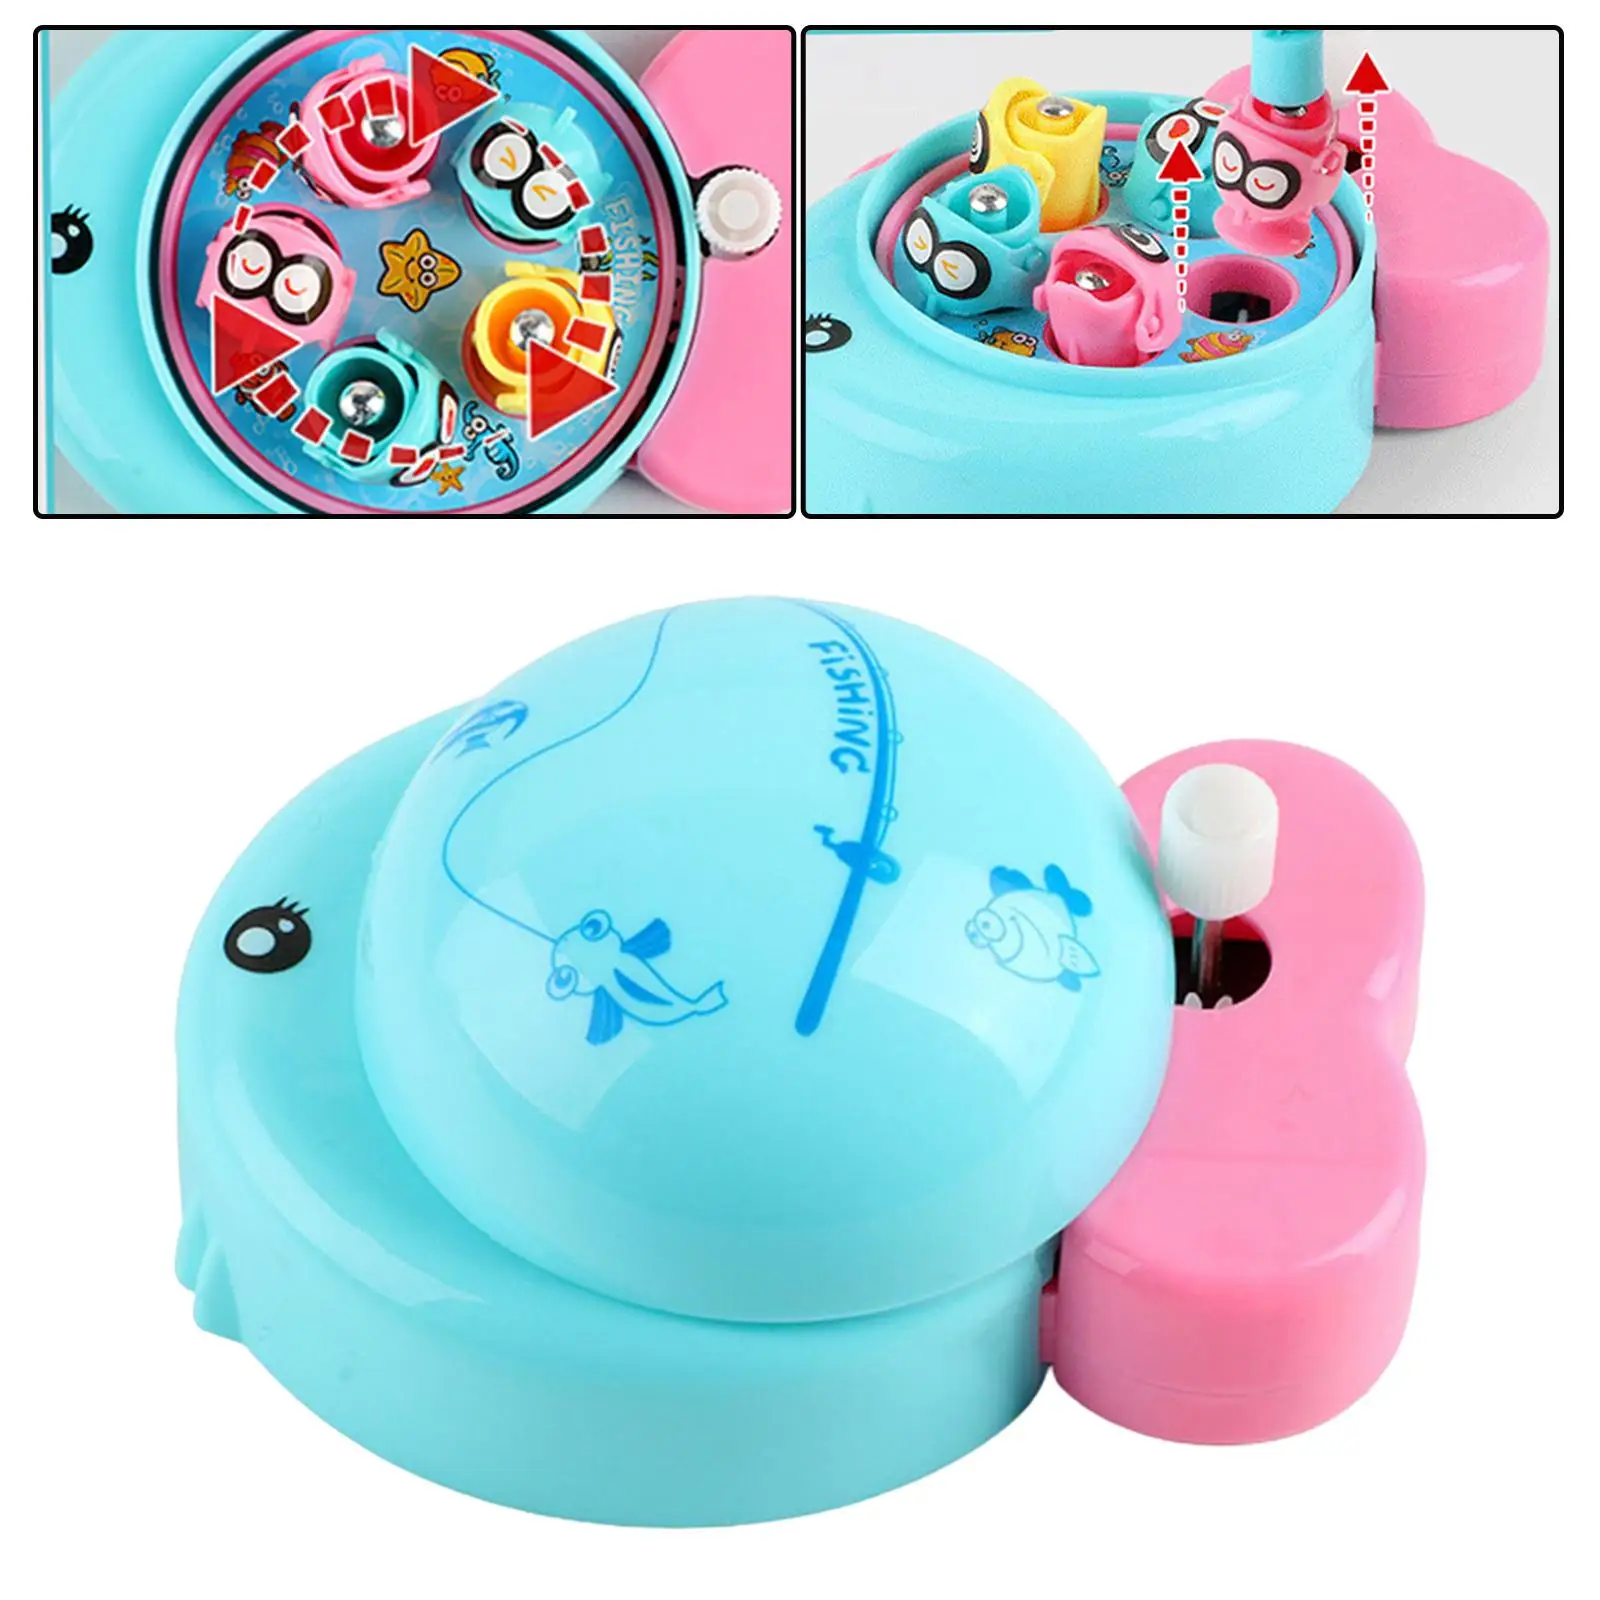 Portable Fishing Game Interactive Toys for Ages 3+ Children Birthday Gifts